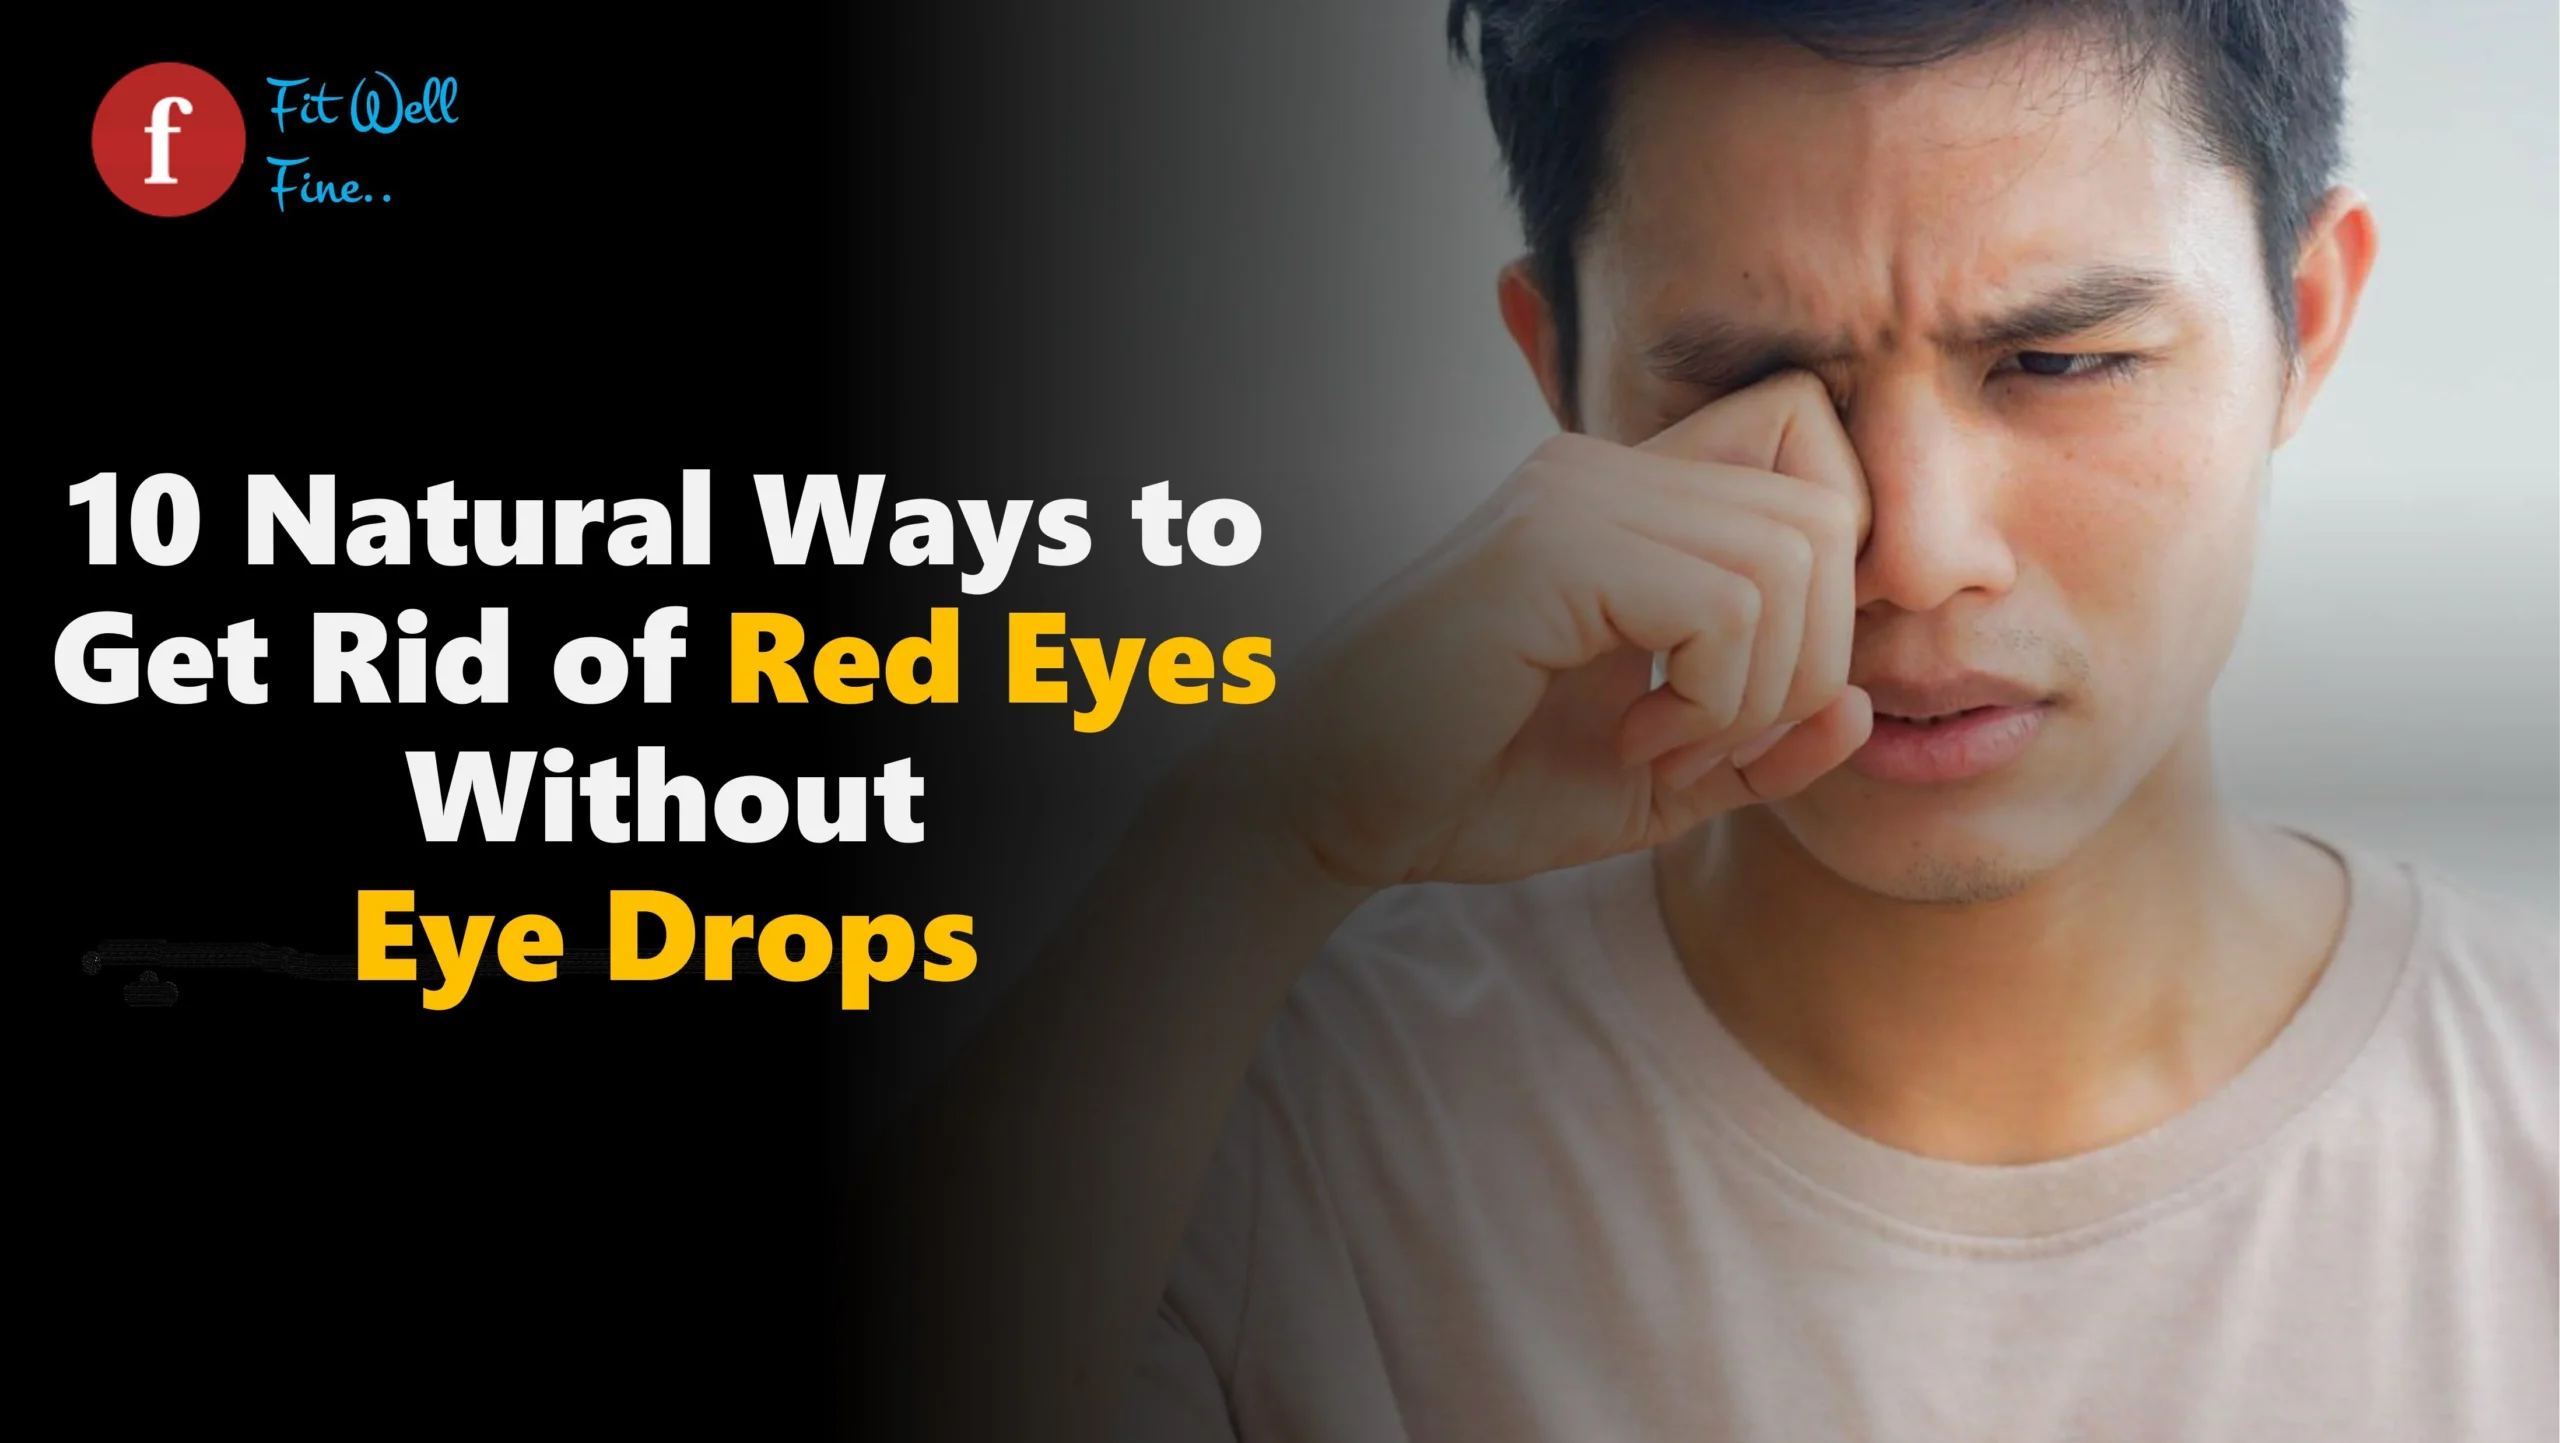 Natural Ways to Get Rid of Red Eyes Without Eye Drops